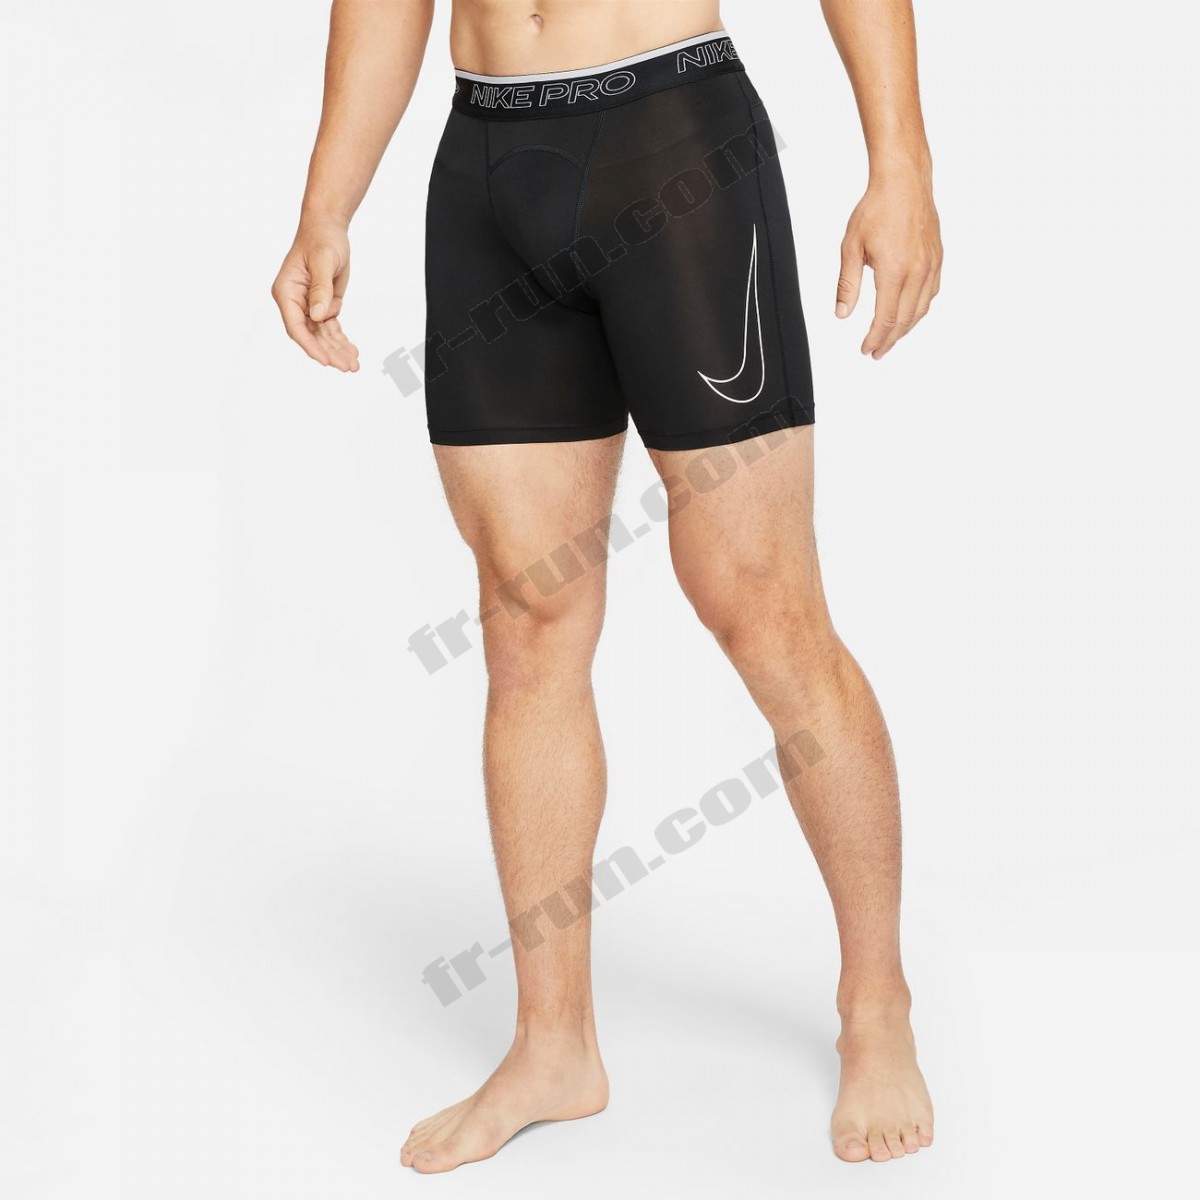 Nike/Fitness homme NIKE Short de compression Nike Dri-Fit √ Nouveau style √ Soldes - Nike/Fitness homme NIKE Short de compression Nike Dri-Fit √ Nouveau style √ Soldes